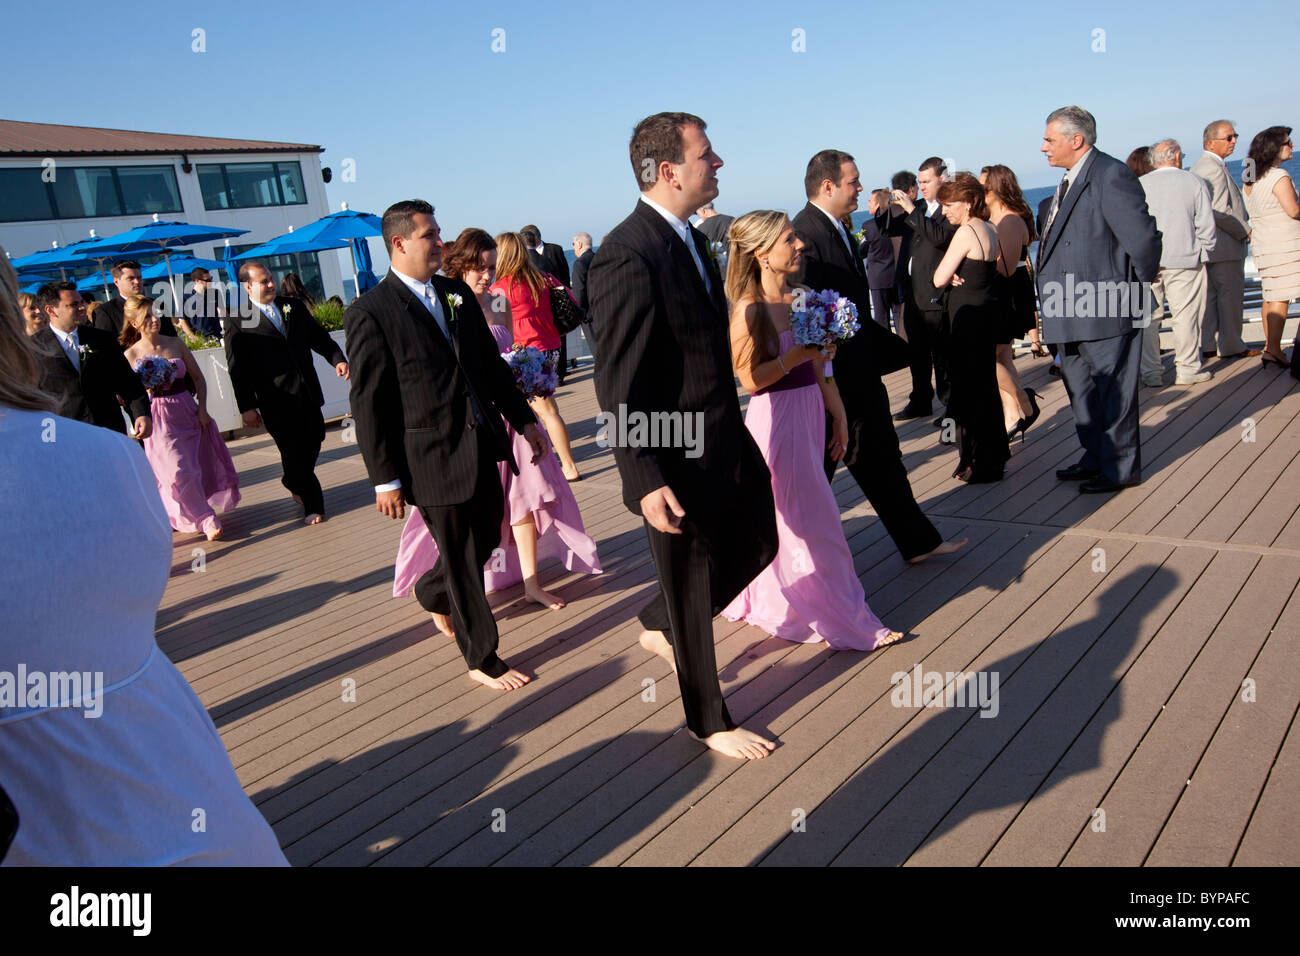 USA, New Jersey, Monmouth Beach, Members of wedding party walk barefoot down boardwalk during beach wedding on summer afternoon Stock Photo